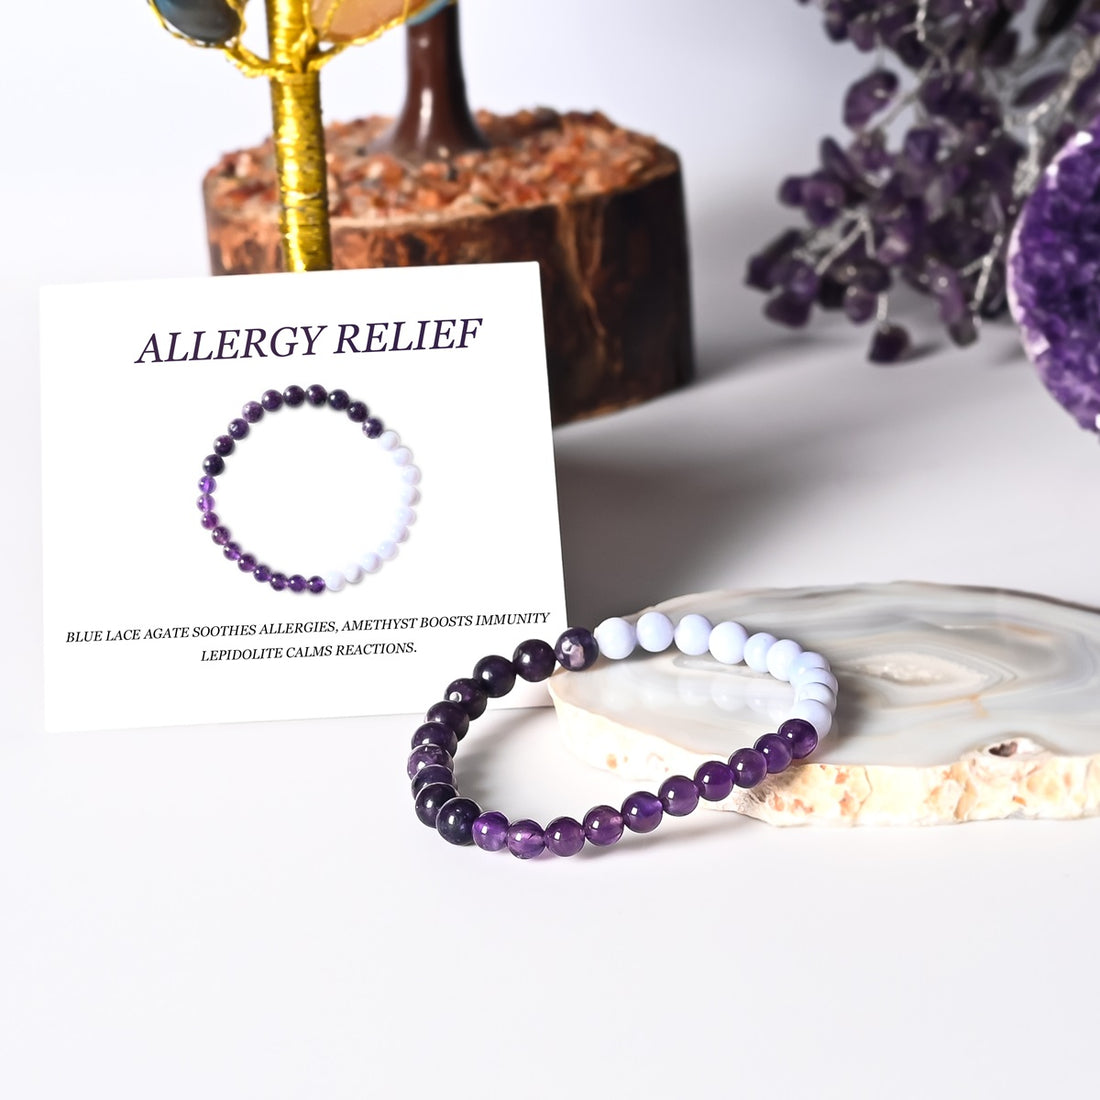 Stylish composition showcasing the Allergy Relief Bracelet with healing gemstone beads.